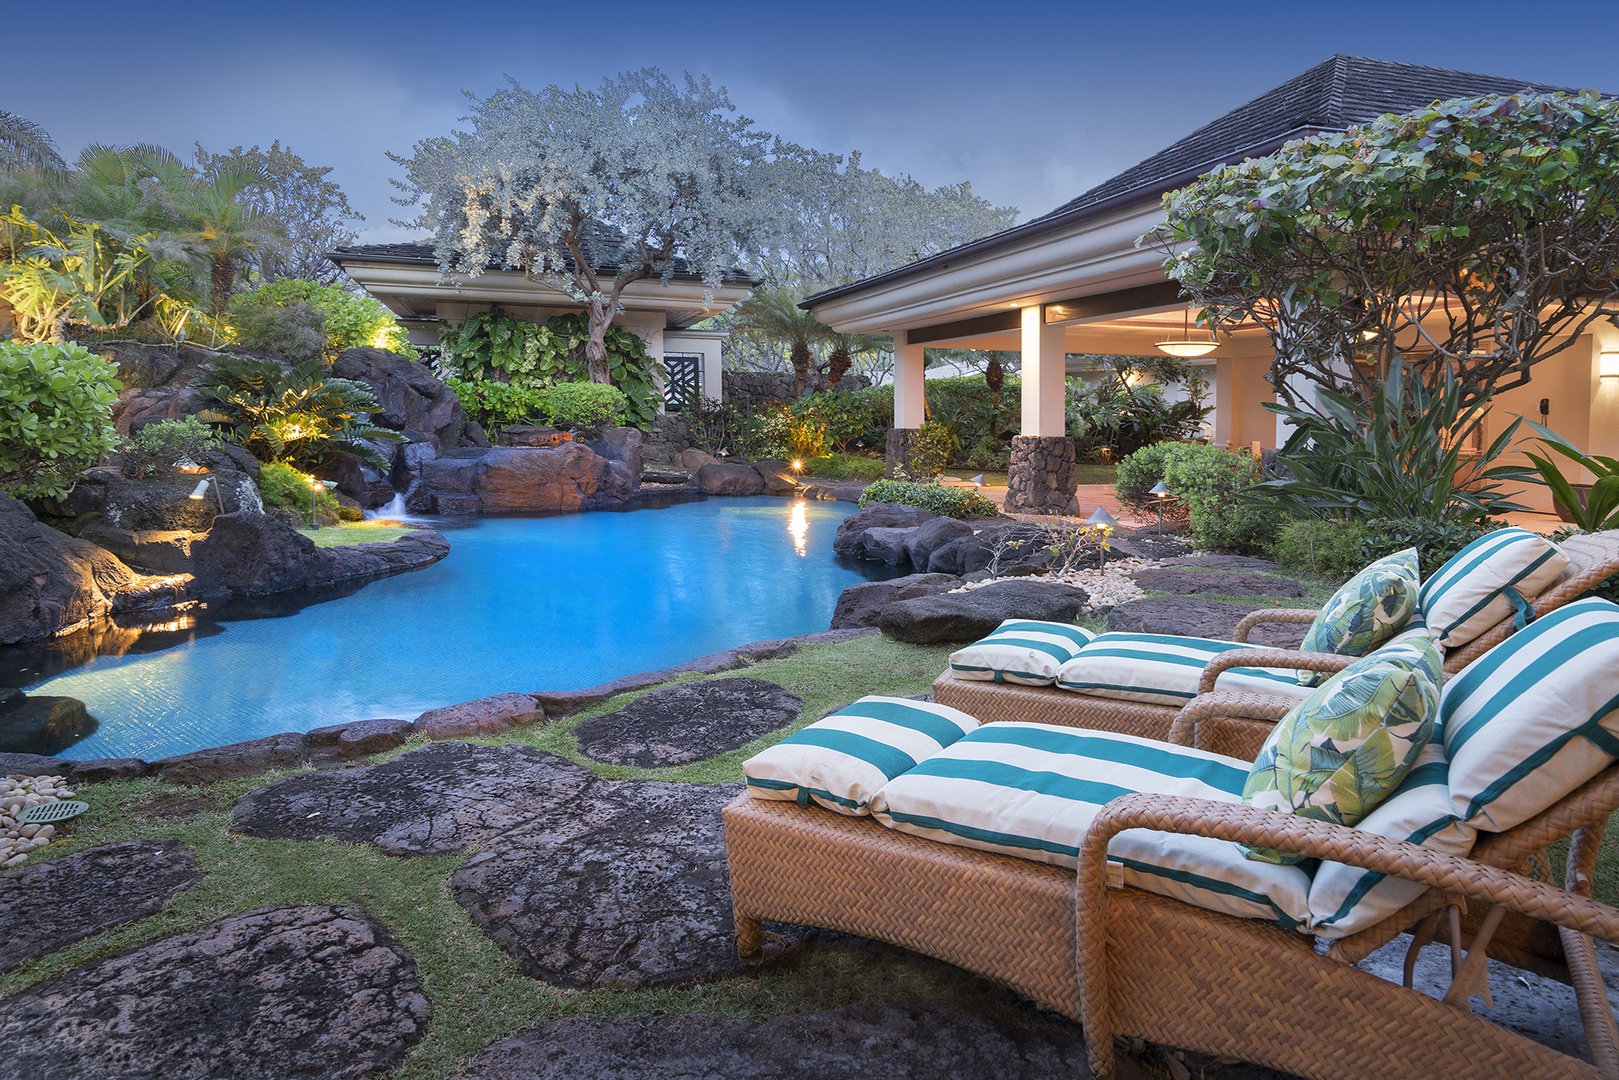 Kailua Vacation Rentals, Kailua's Kai Moena - Tropical lagoon style pool and spa with natural rocks and cascading waterfalls.